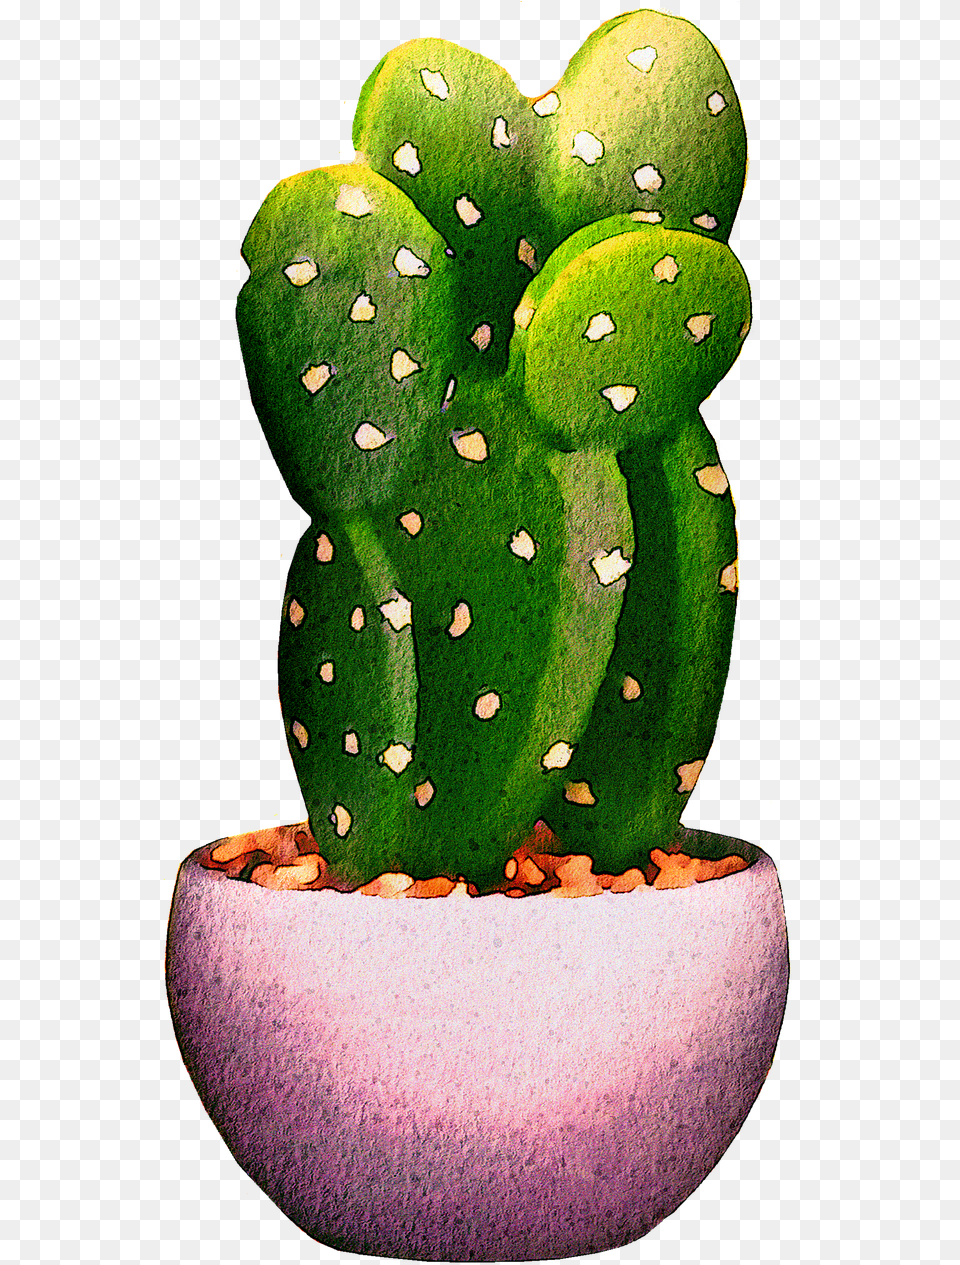 Watercolor Cactus Succulents Cacti Image On Pixabay Cactos E Suculentas, Green, Plant, Potted Plant Png